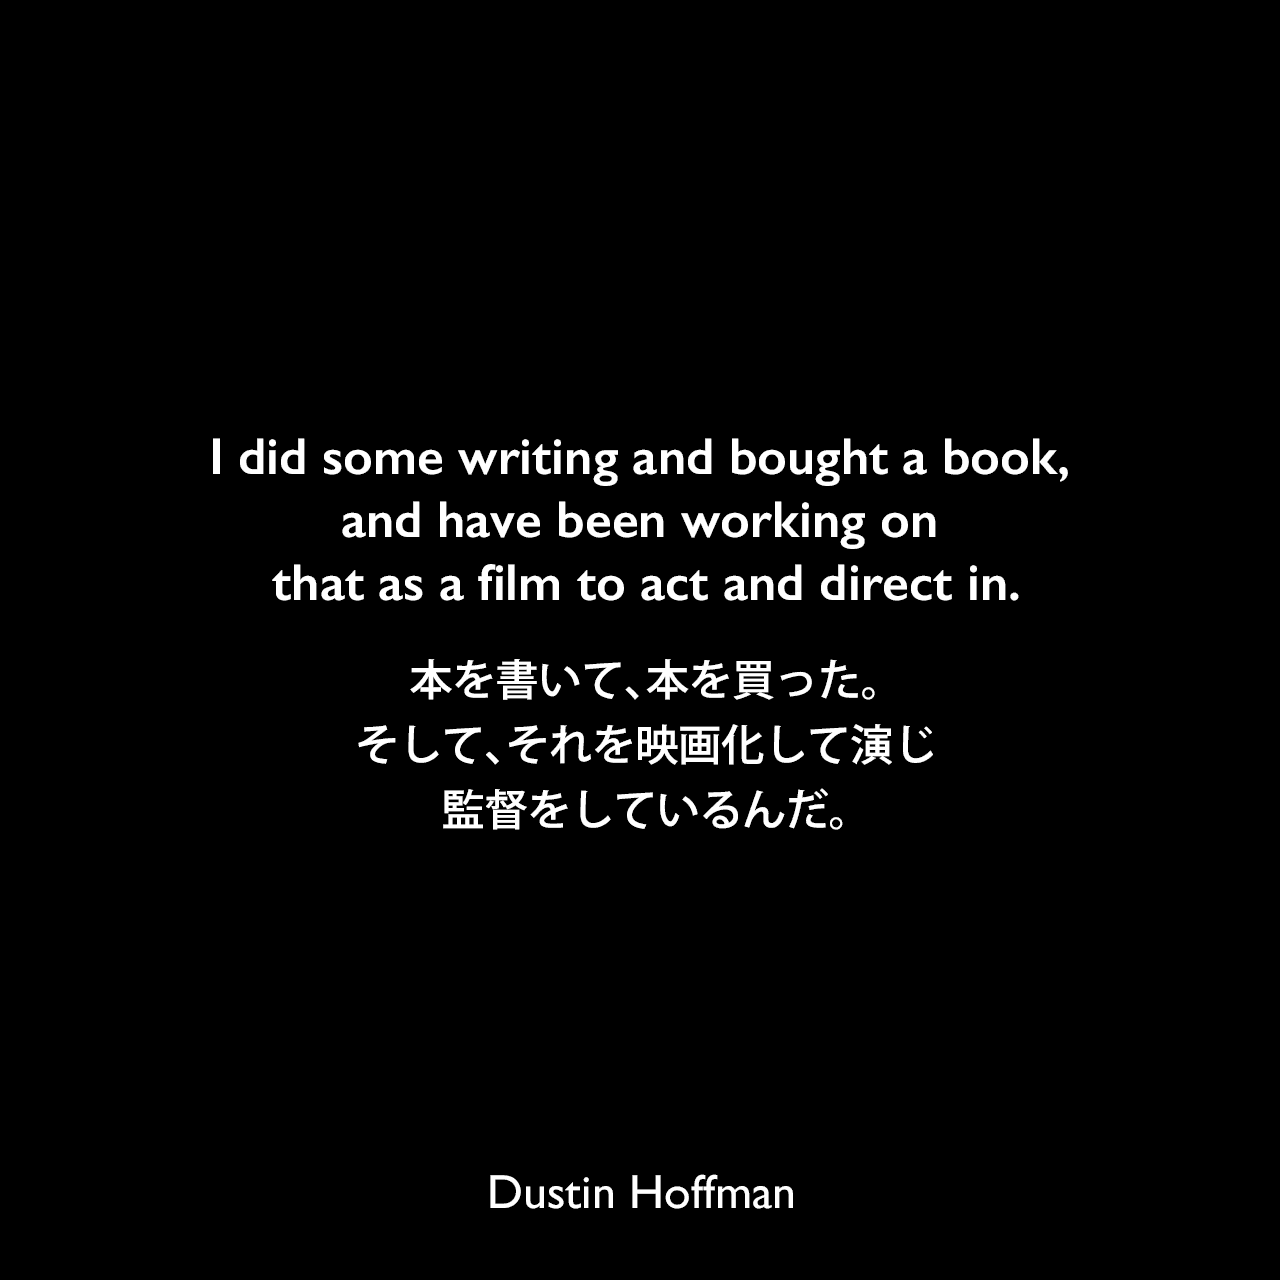 I did some writing and bought a book, and have been working on that as a film to act and direct in.本を書いて、本を買った。そして、それを映画化して演じ、監督をしているんだ。Dustin Hoffman